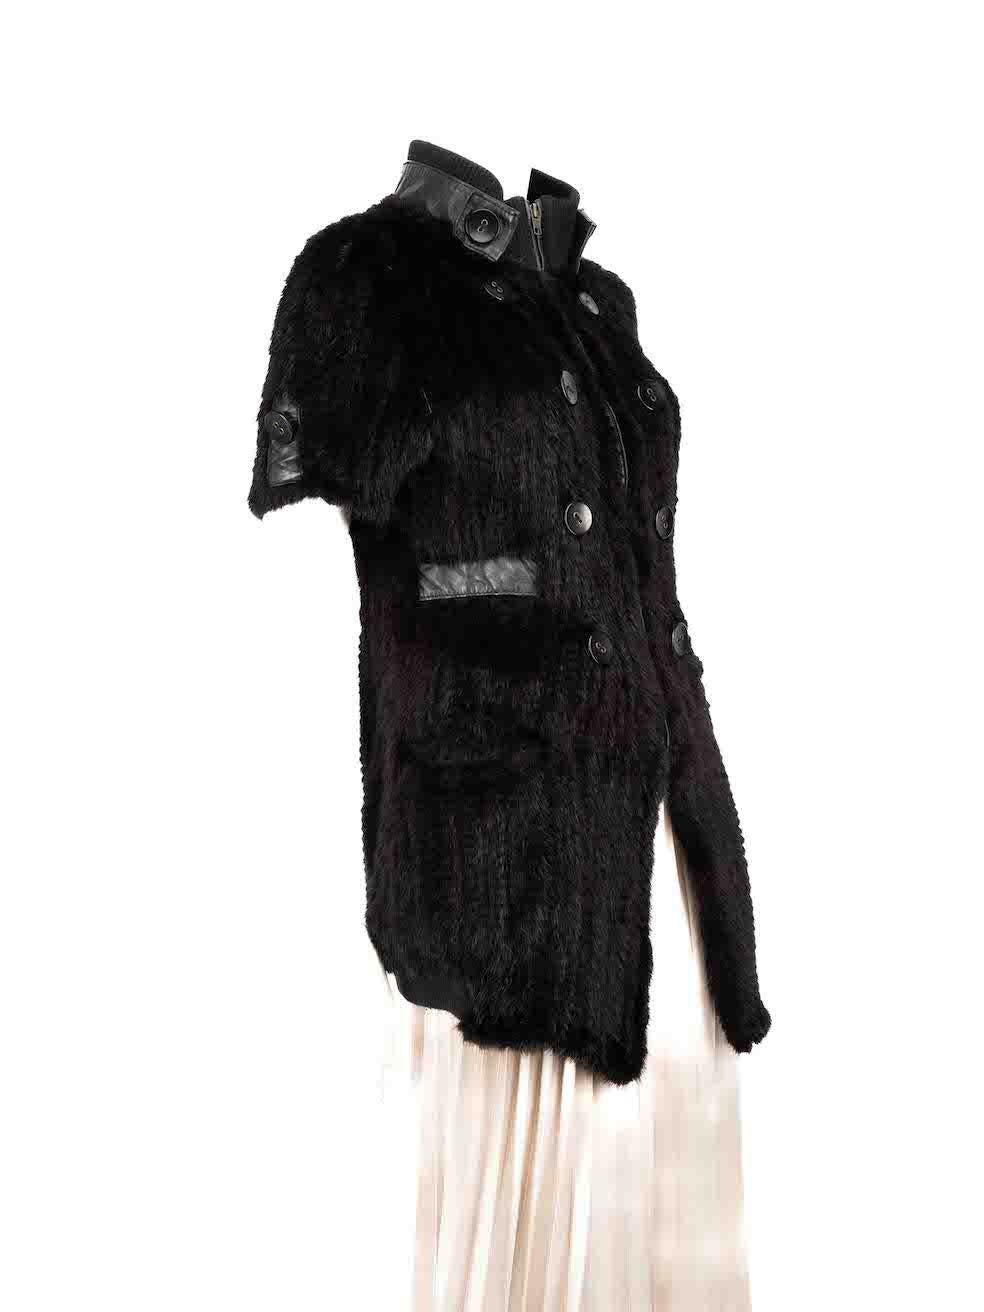 CONDITION is Good. Light wear to jacket is evident. Light wear to interior where parts of the fur panel has come off. The brand label and composition label is missing on this used Unbranded designer resale item.
 
 
 
 Details
 
 
 Black
 
 Fur
 
